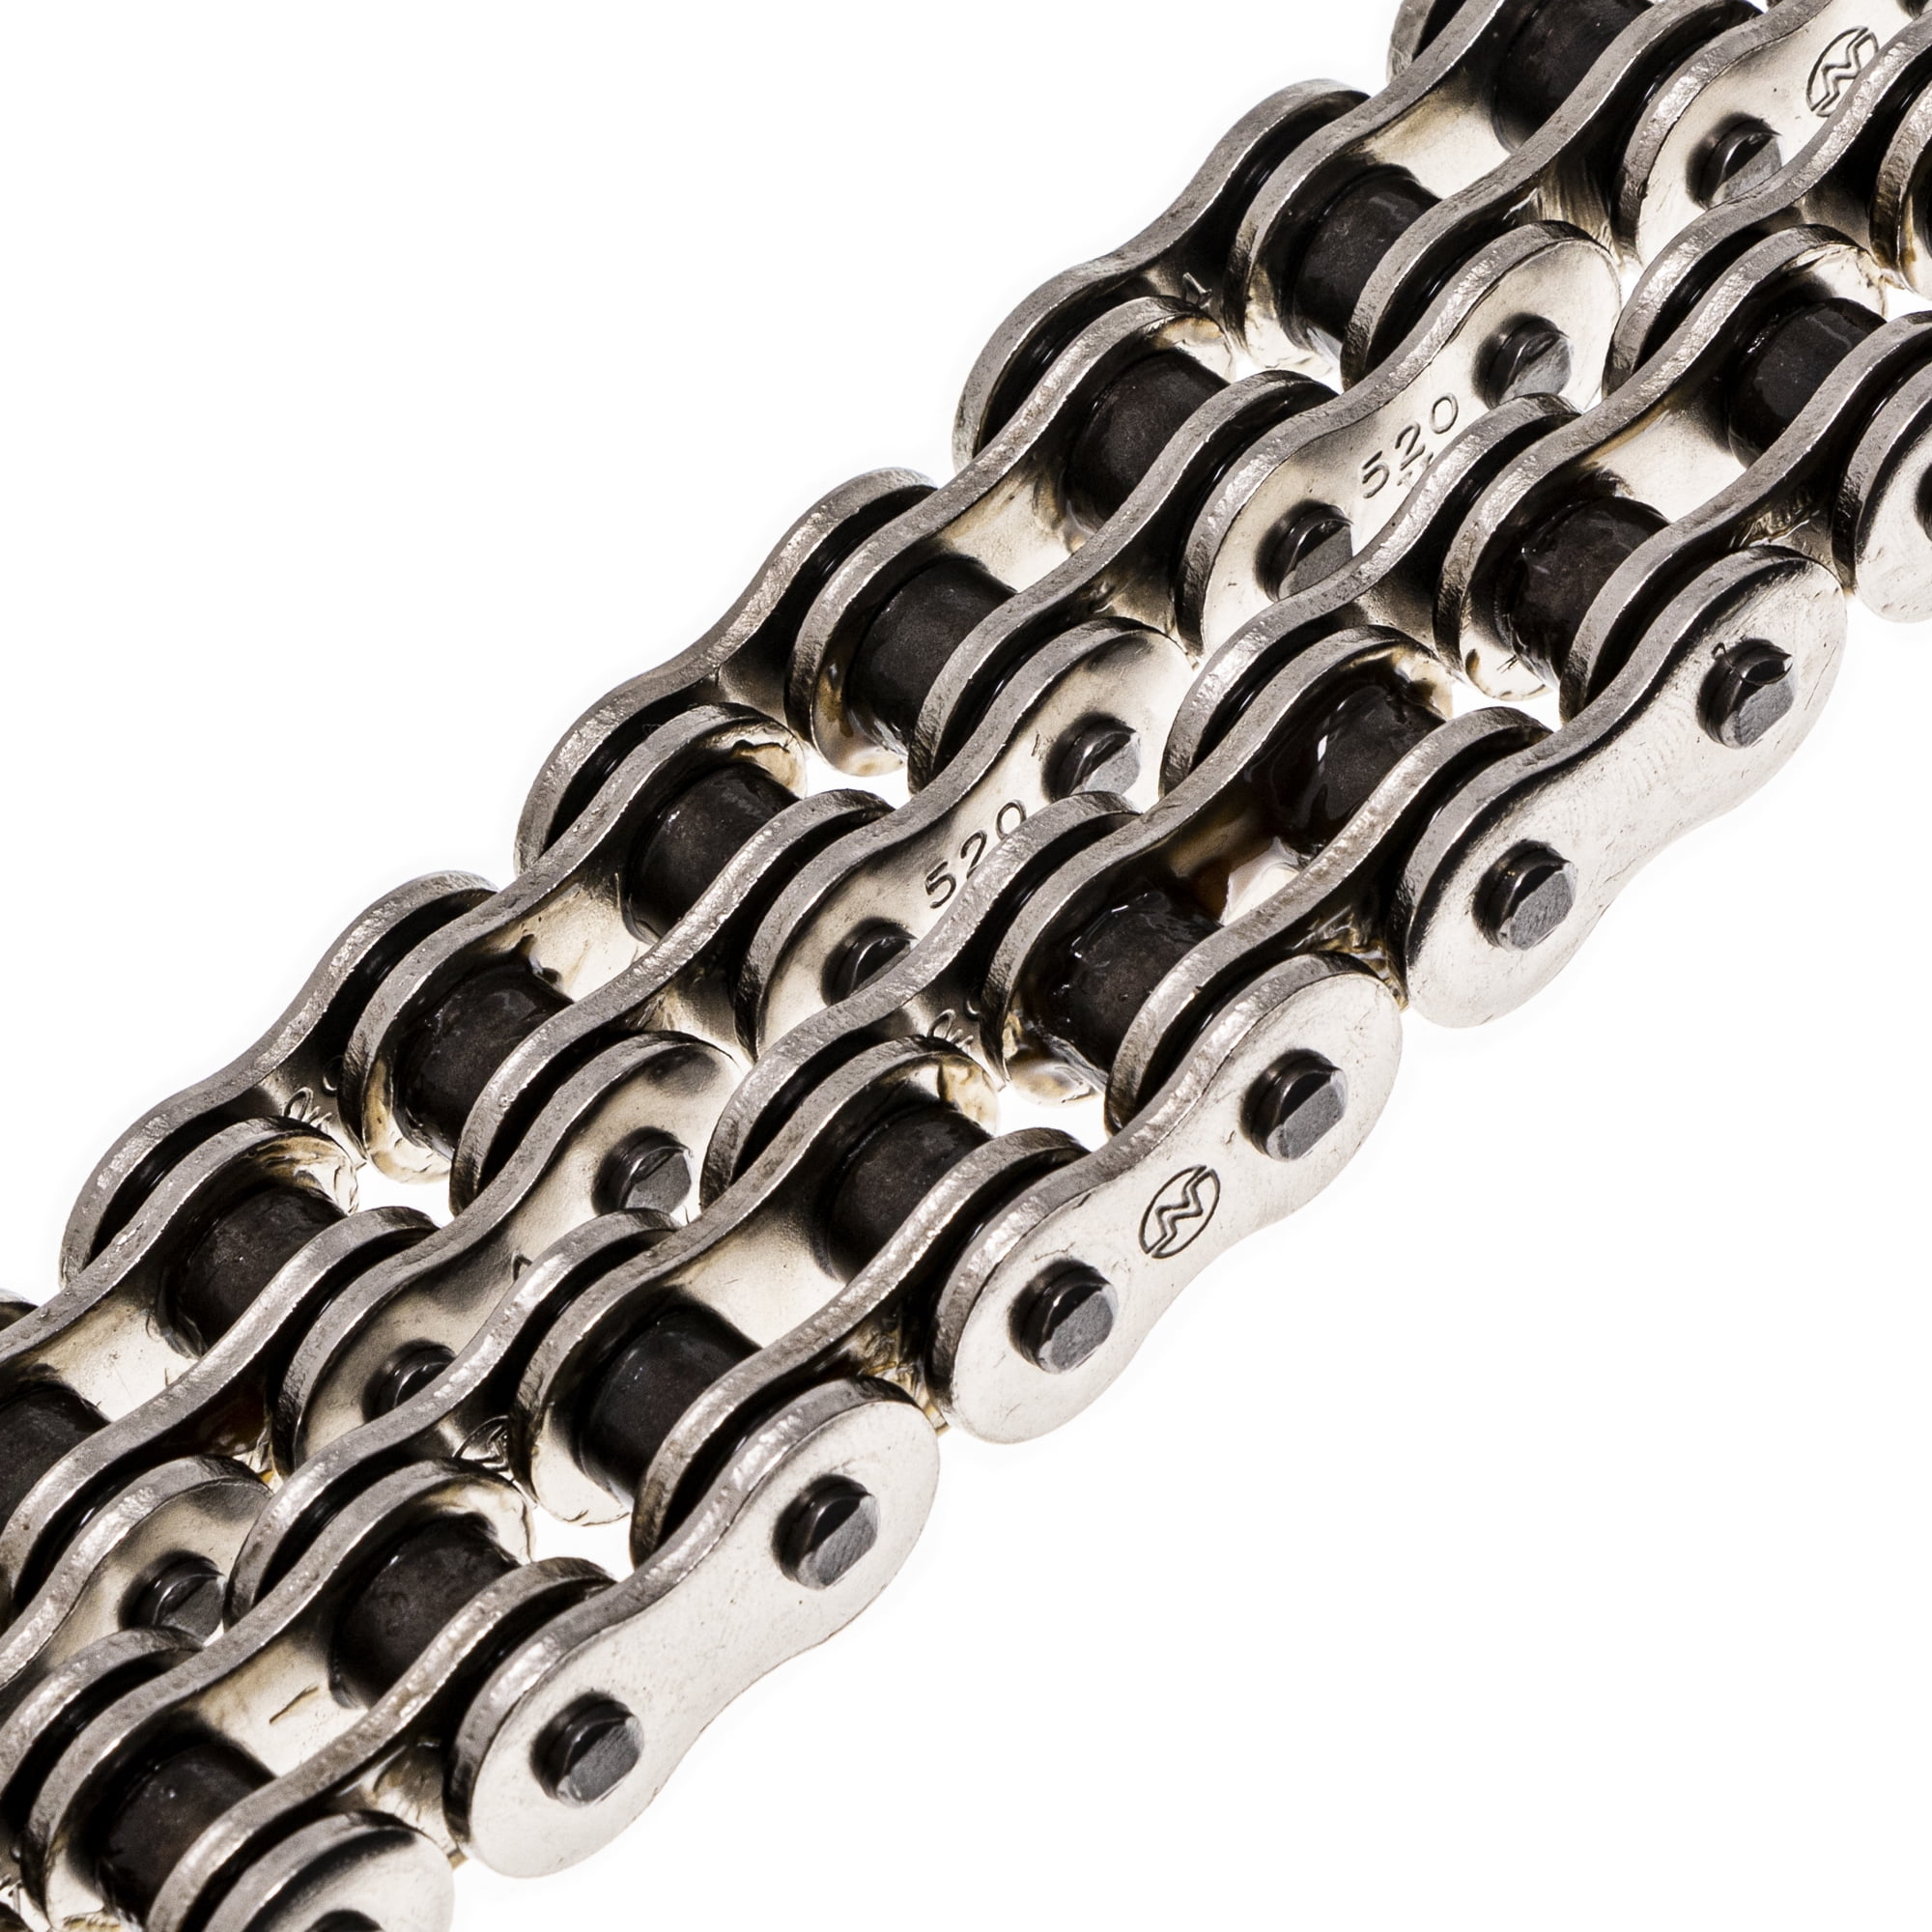 Niche 520 Drive Chain 88 Links O-Ring With Master Link for 